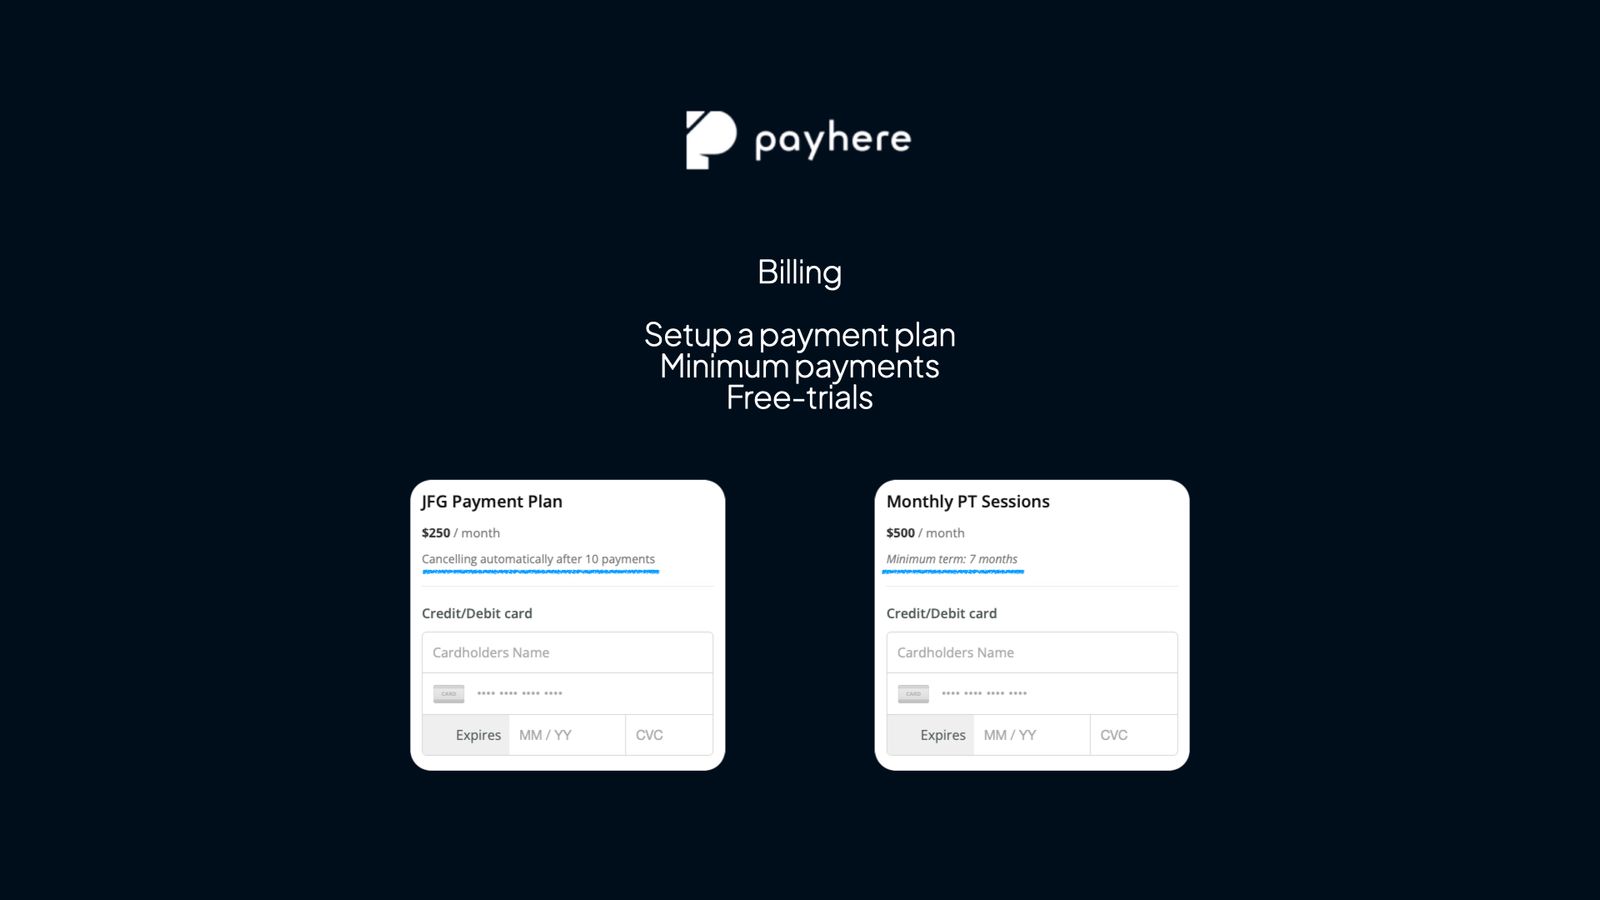 Billing- Create payment plans, minimum terms and free trials